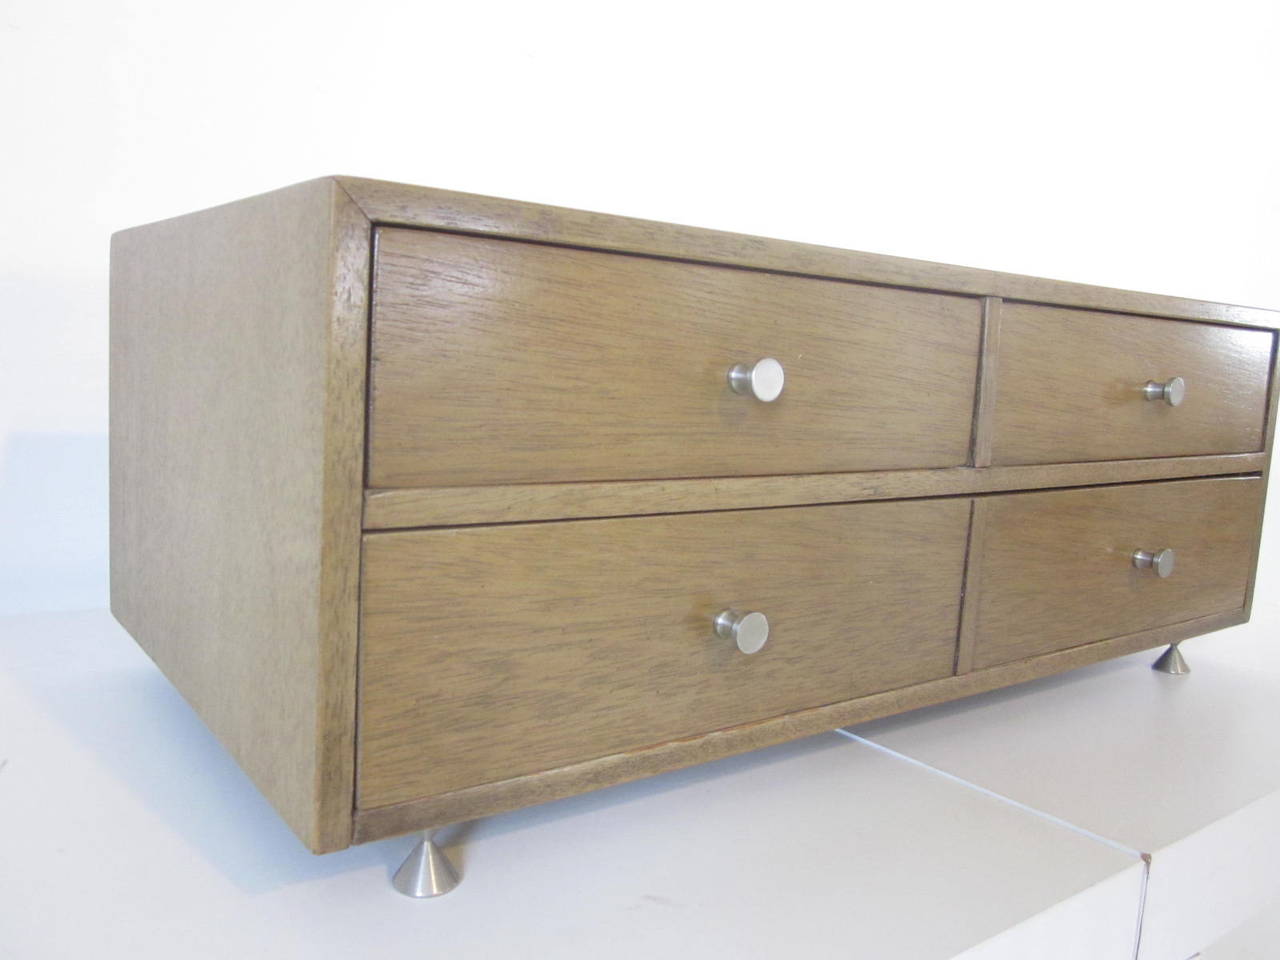 A three-drawer Mid-Century jewelry chest with stainless pulls and matching hour glass legs, bottom drawer has a adjustable divider.